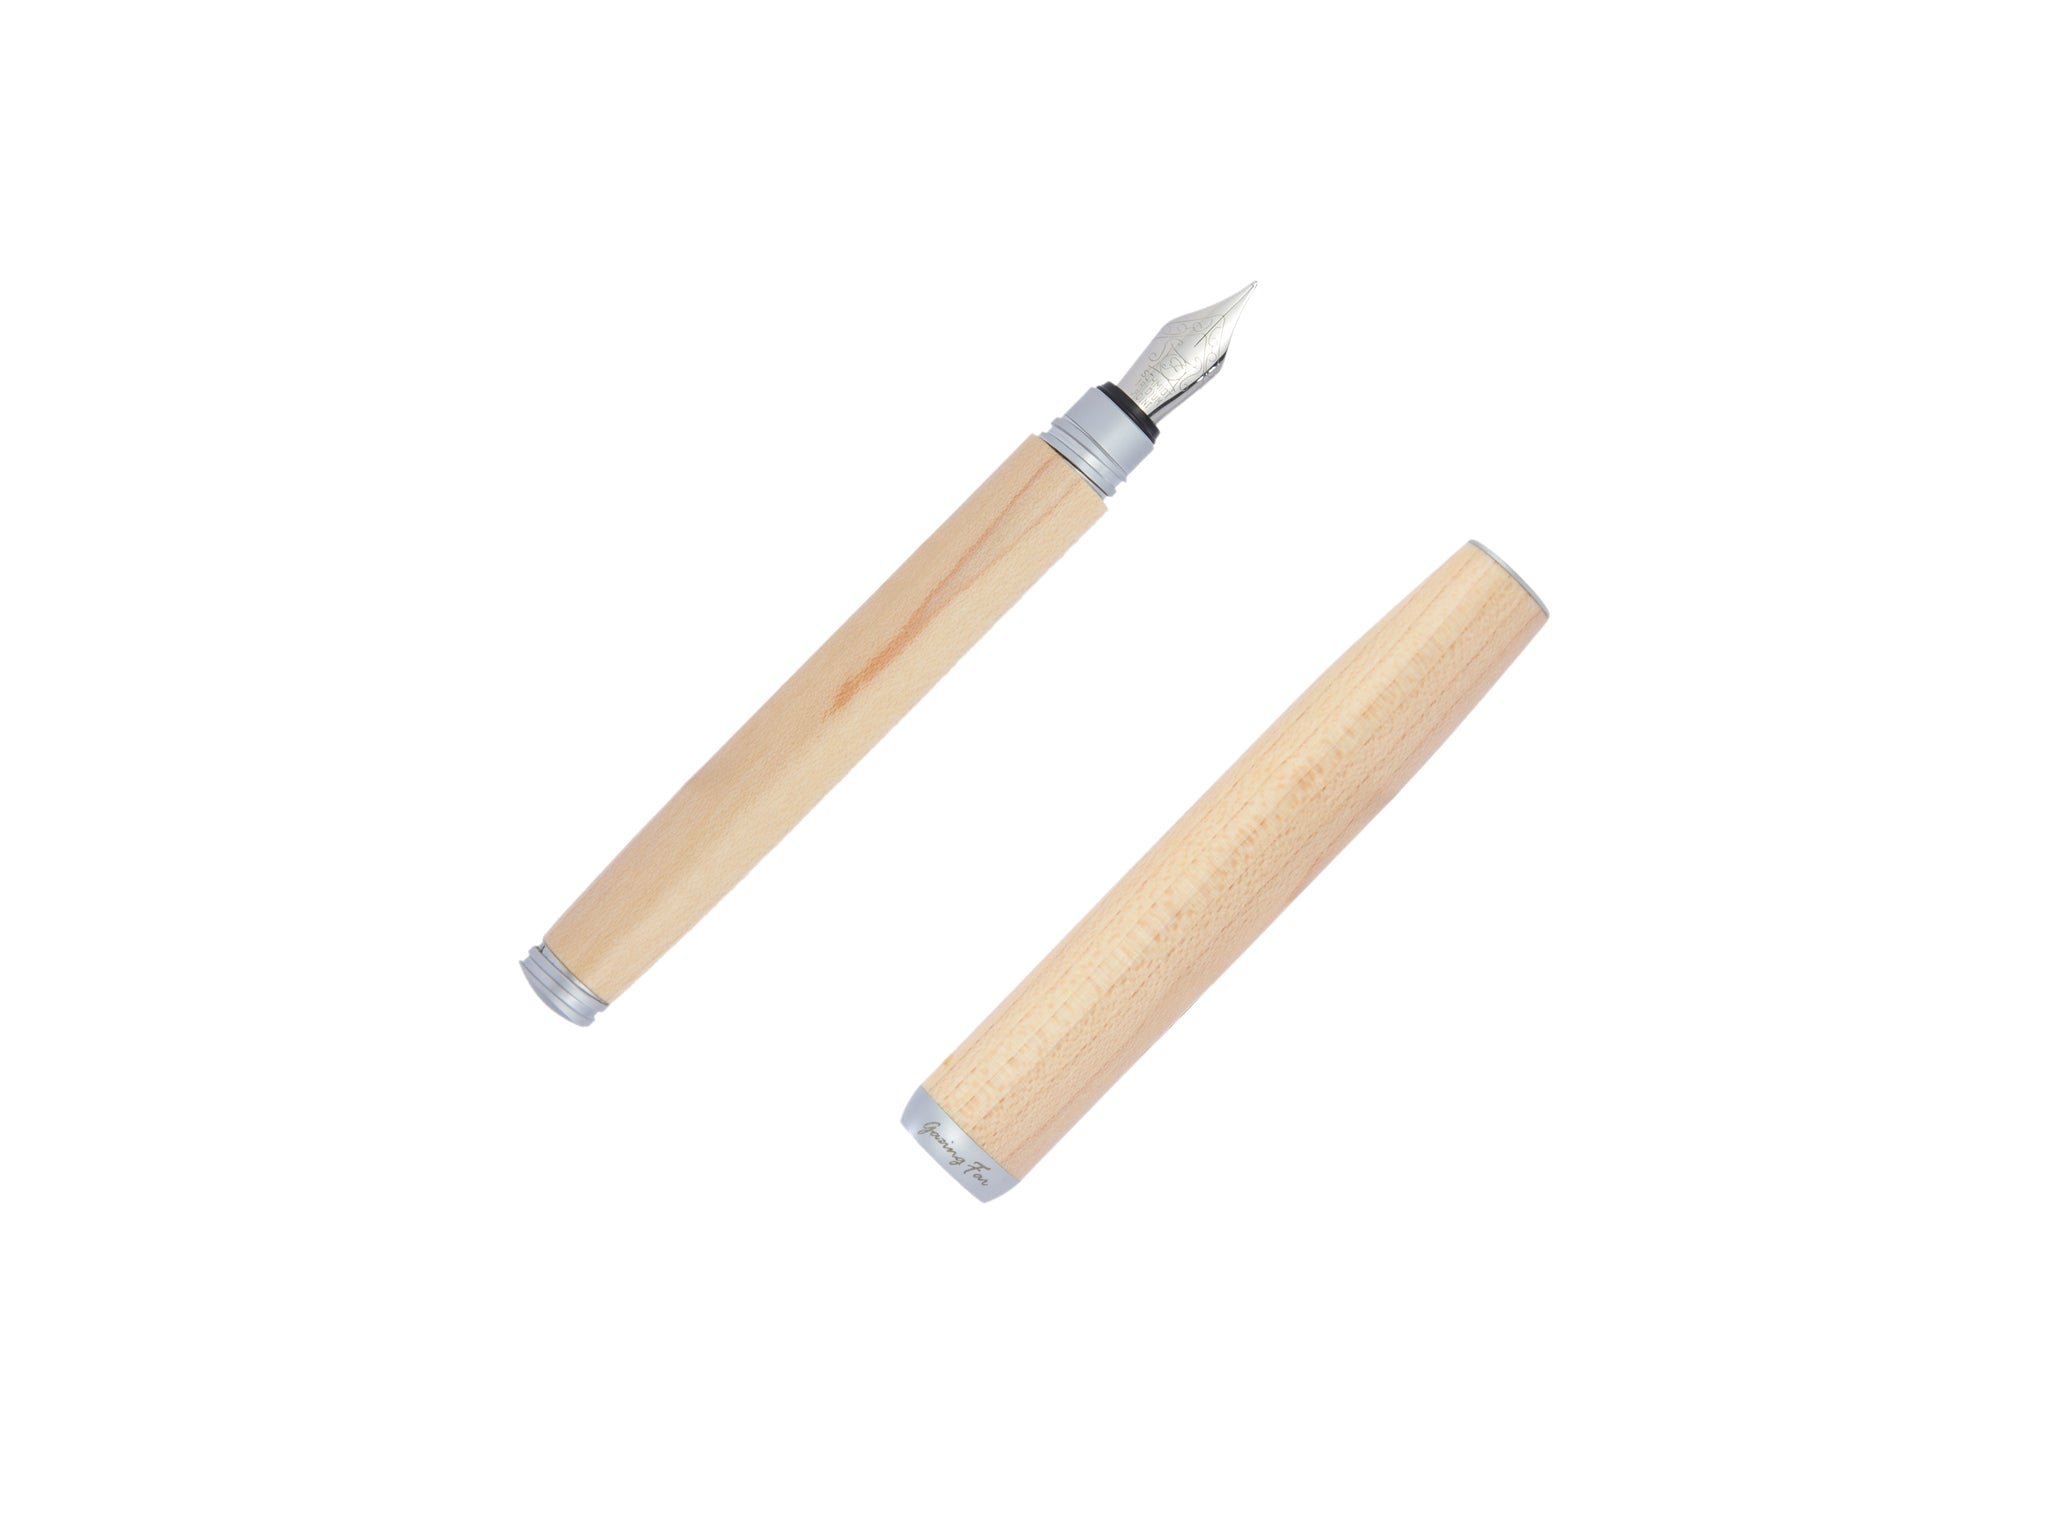 tmX, the most tiny wooden fountain pen